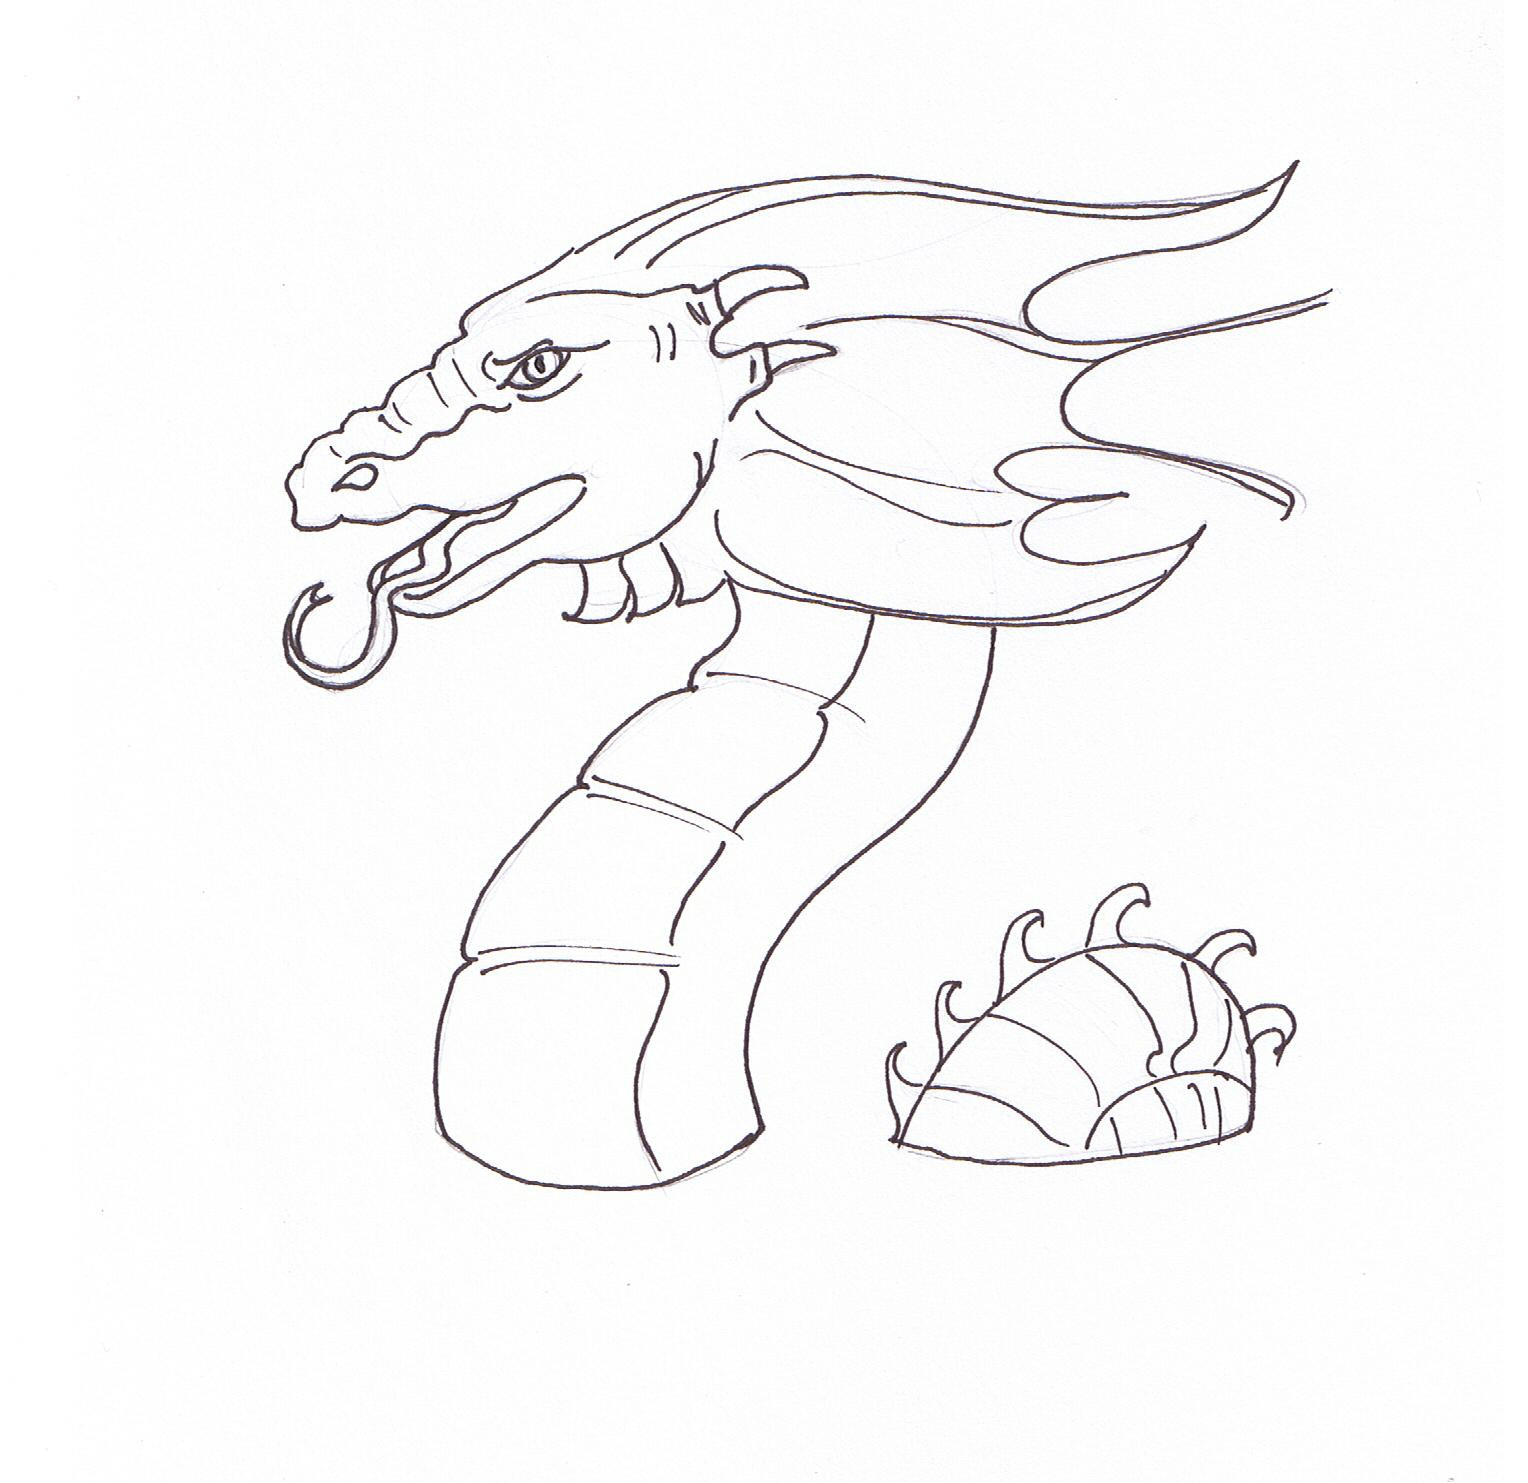 Awesome Coloring Pages For Boys
 dragon coloring pages